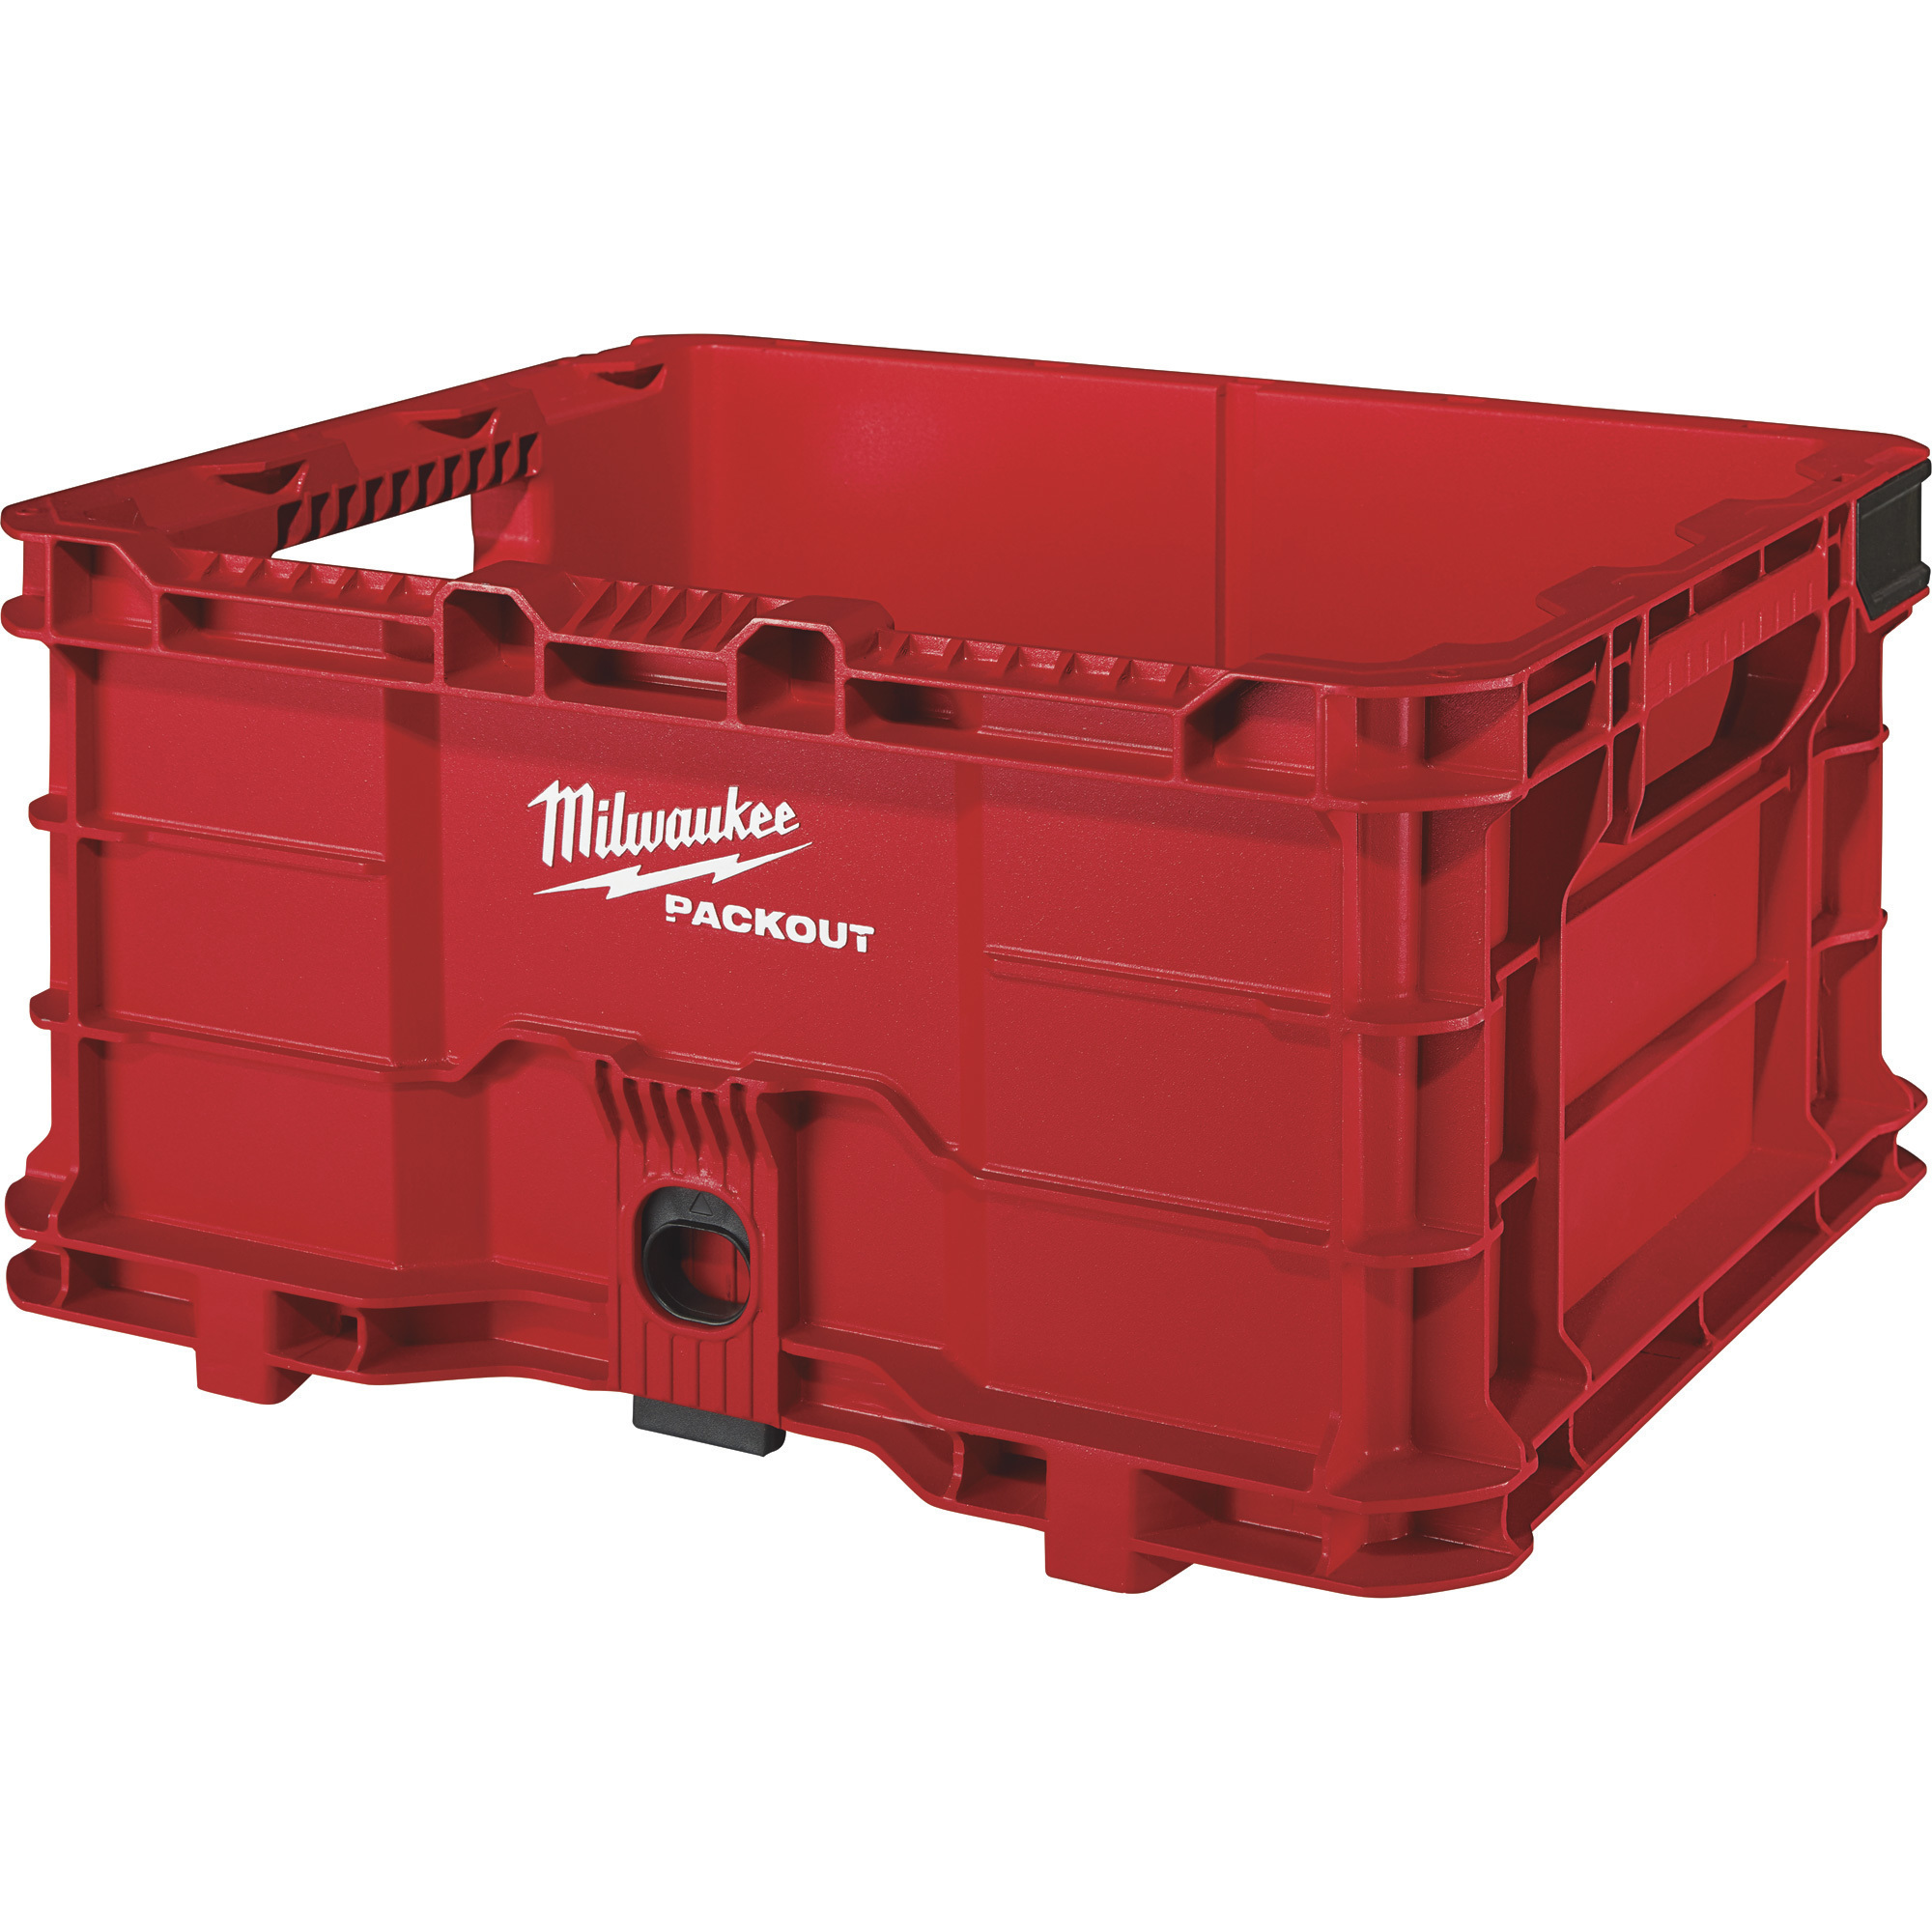 Milwaukee Packout Crate, 15 13/32Inch L x 18 5/8Inch W x 10Inch H, Model 48-22-8440